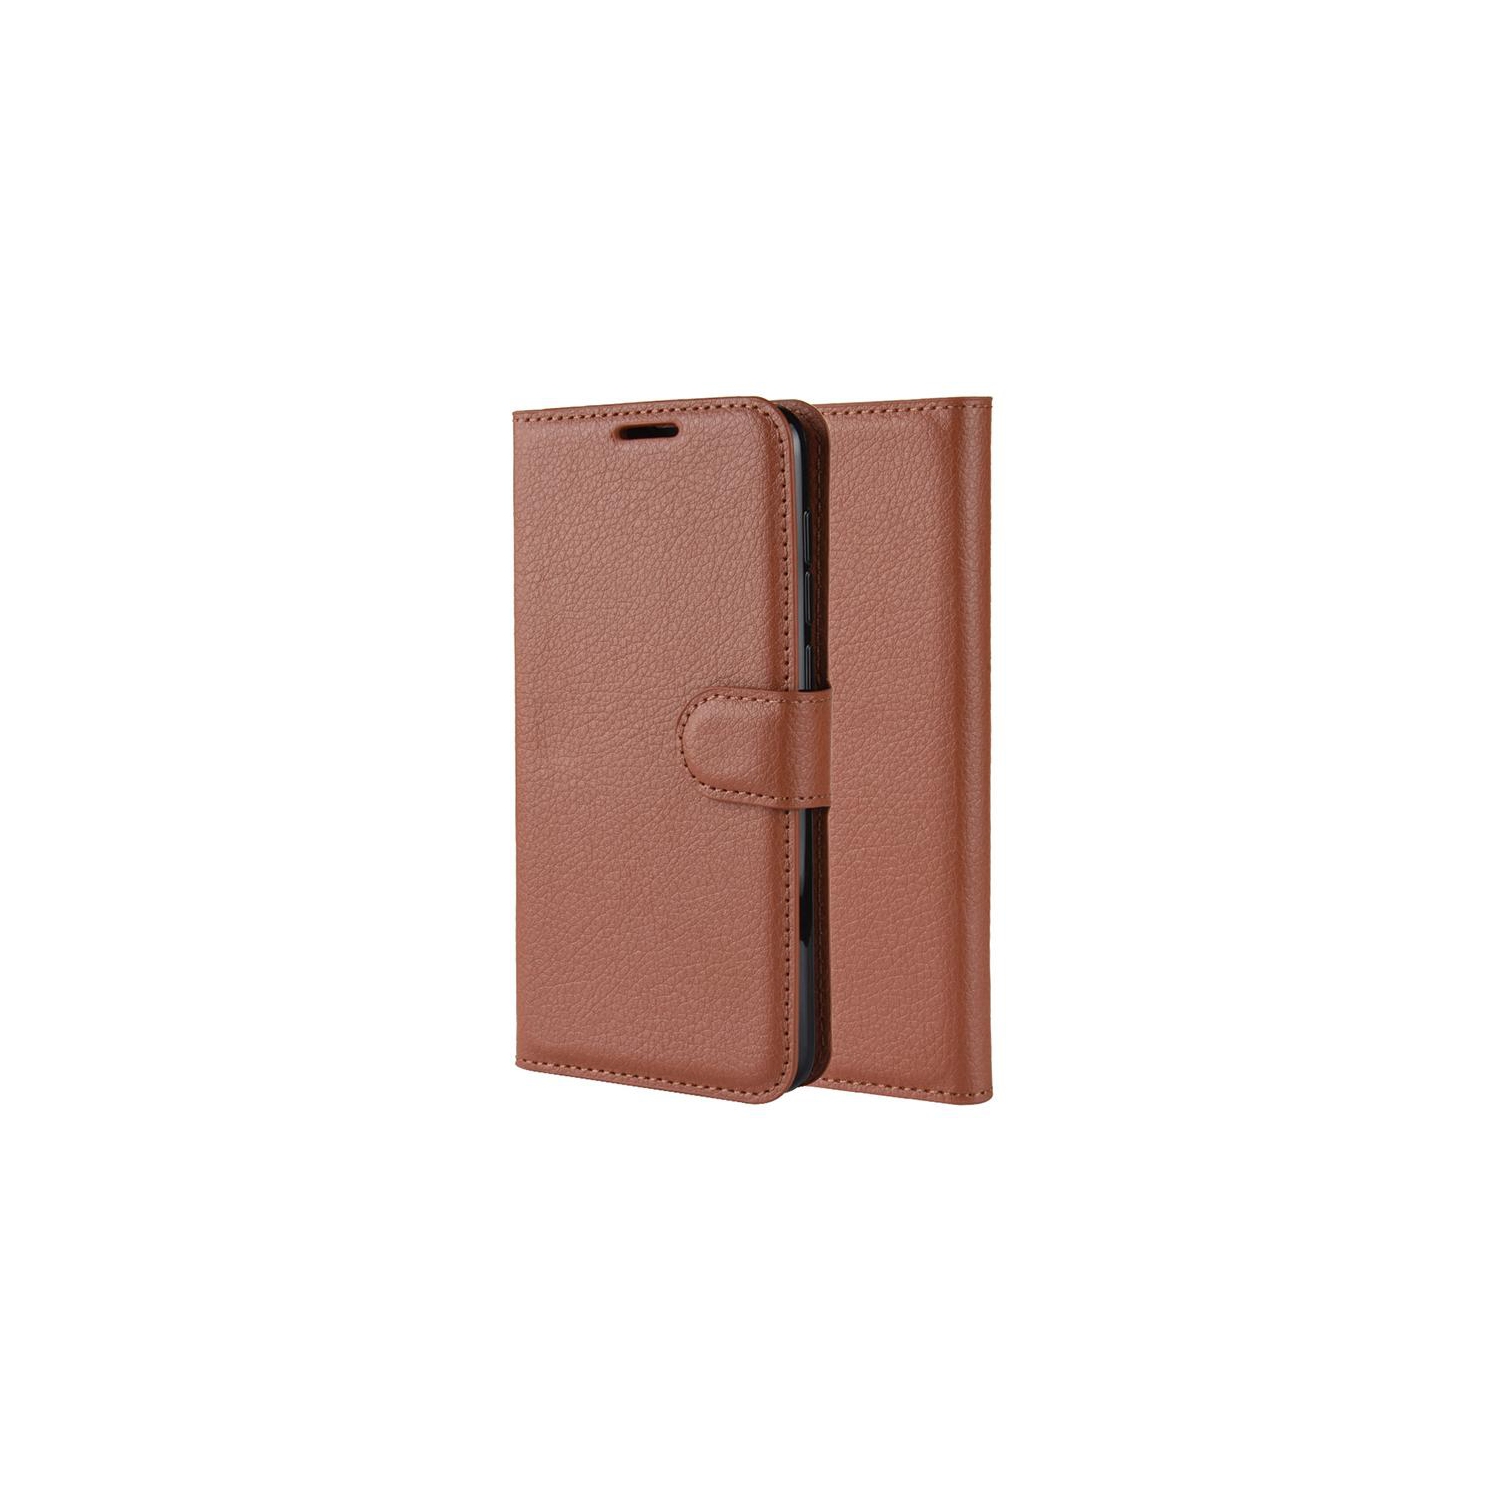 PANDACO Brown Leather Wallet Case for Samsung Galaxy A20